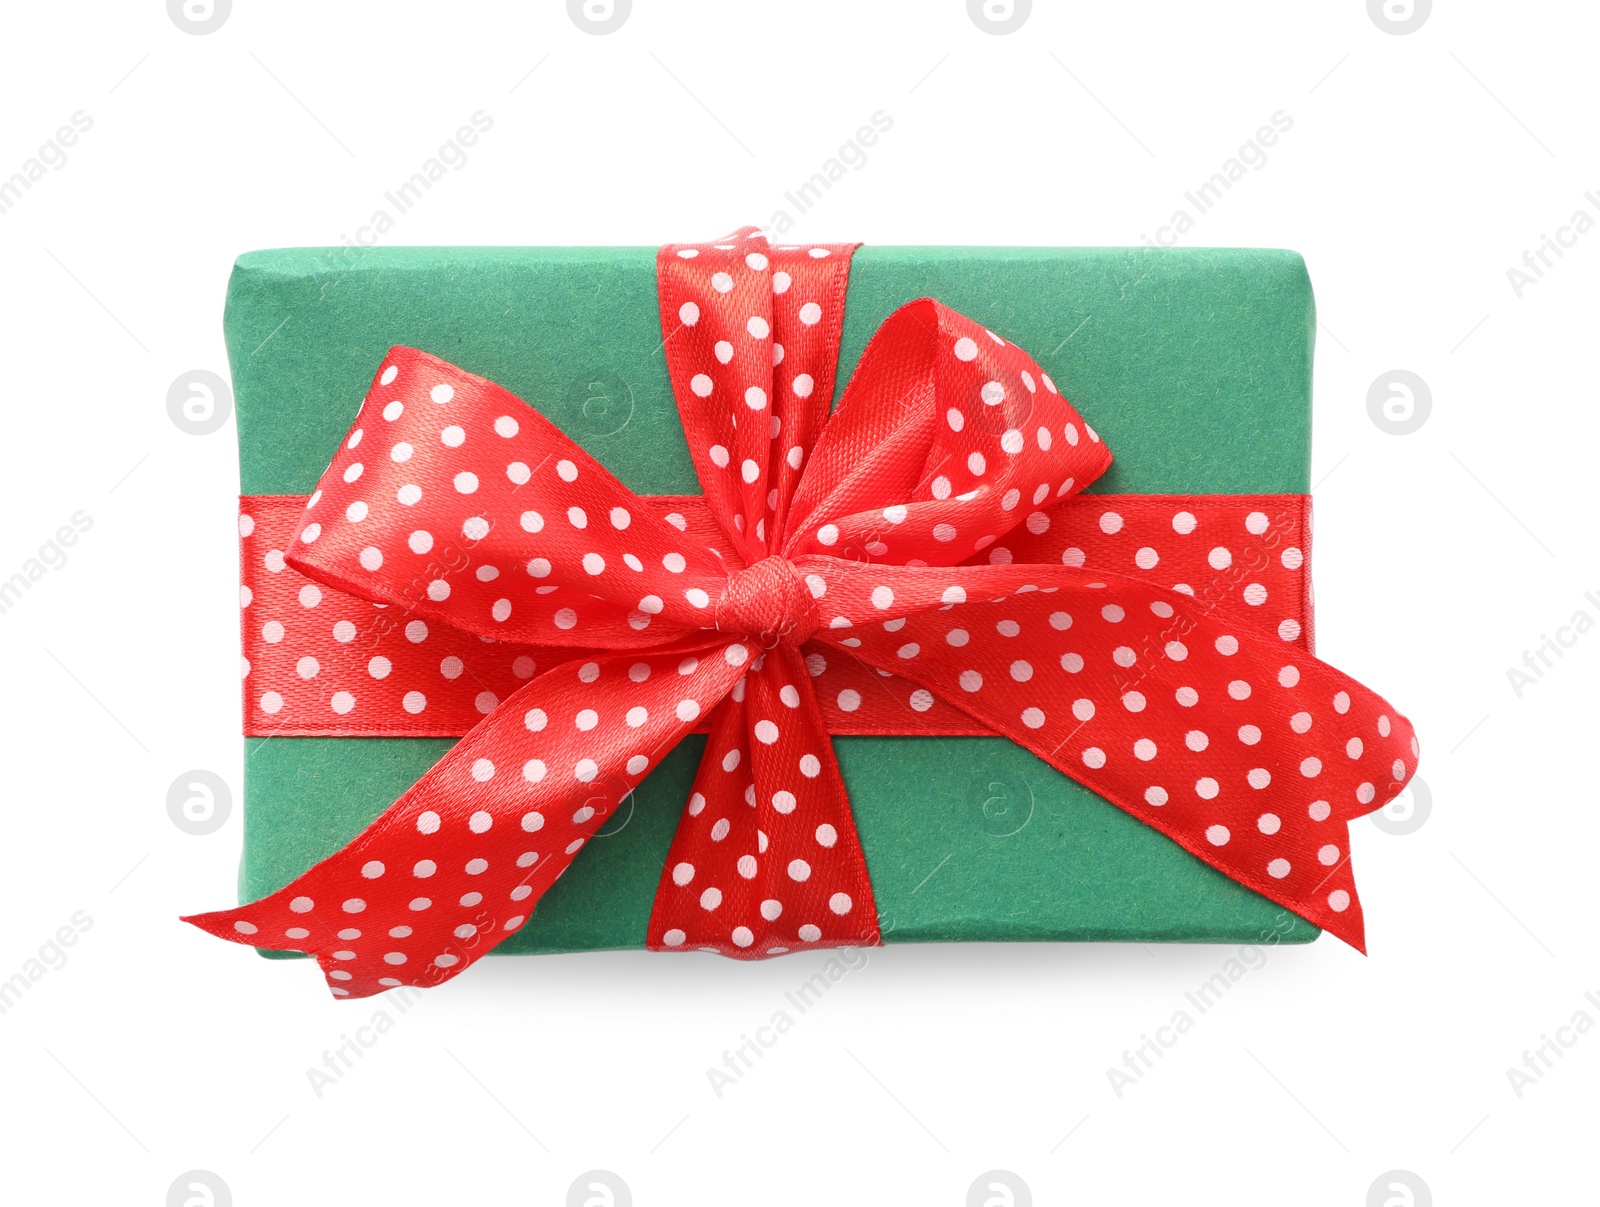 Photo of Christmas gift box decorated with red bow isolated on white, top view